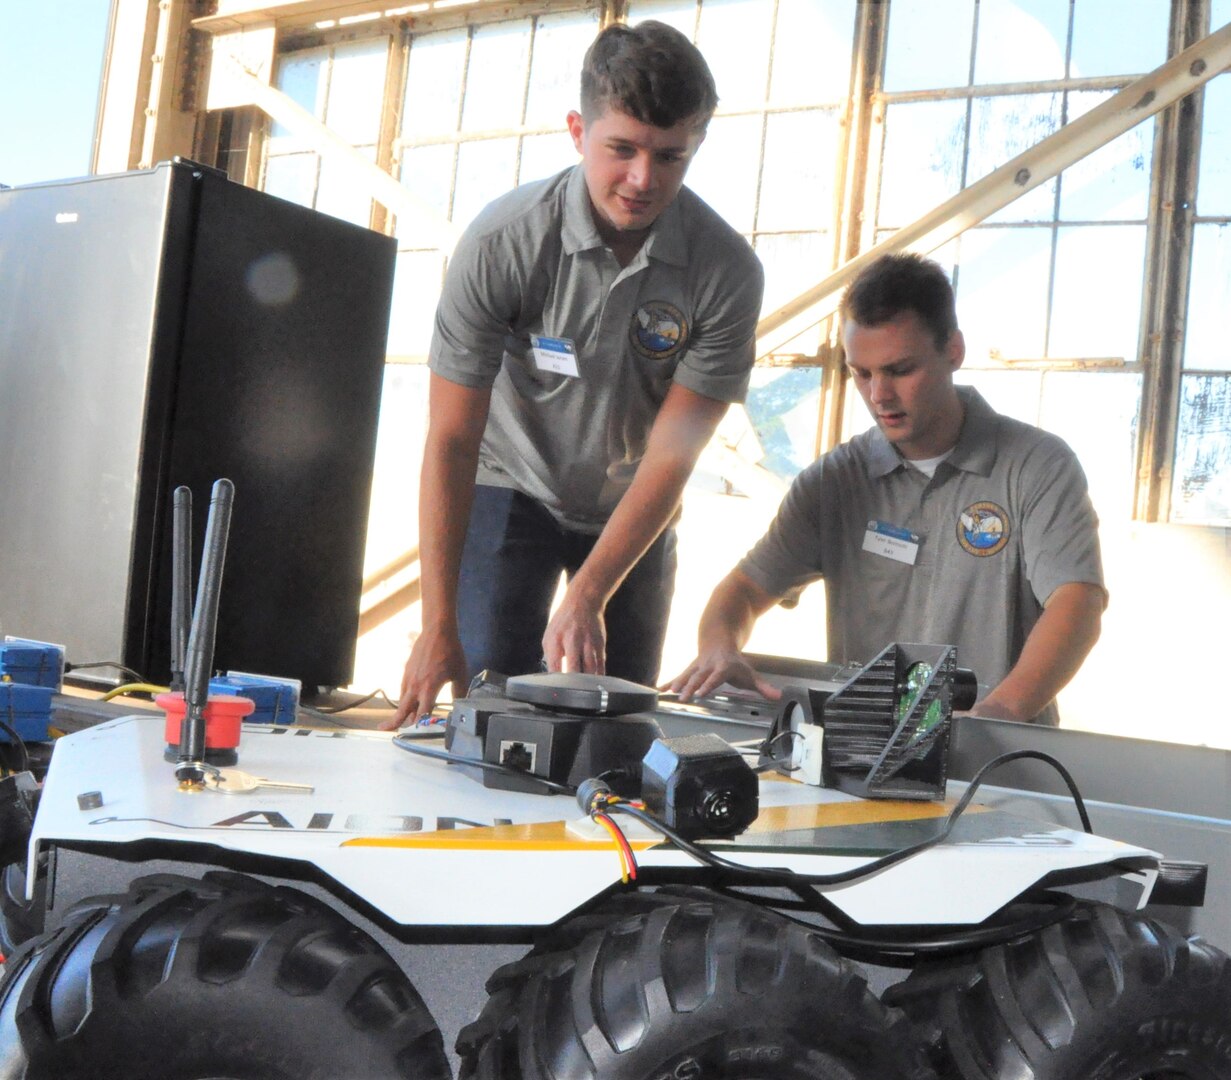 IMAGE: DAHLGREN, Va. (Sept. 19, 2019) – Michael Joram, left, and Tyler Boitnott prepare to demonstrate PERSEUS – the most recent effort in a line of projects solving the integration of high-powered electric weapon systems and electric propulsion systems aboard U.S. Navy ships. They were among a seven-member team of Sly Fox Mission 26 junior scientists and engineers who briefed military, government civilians, and defense contractors five times over the course of two days on their development of PERSEUS.  (U.S. Navy photo/Released)